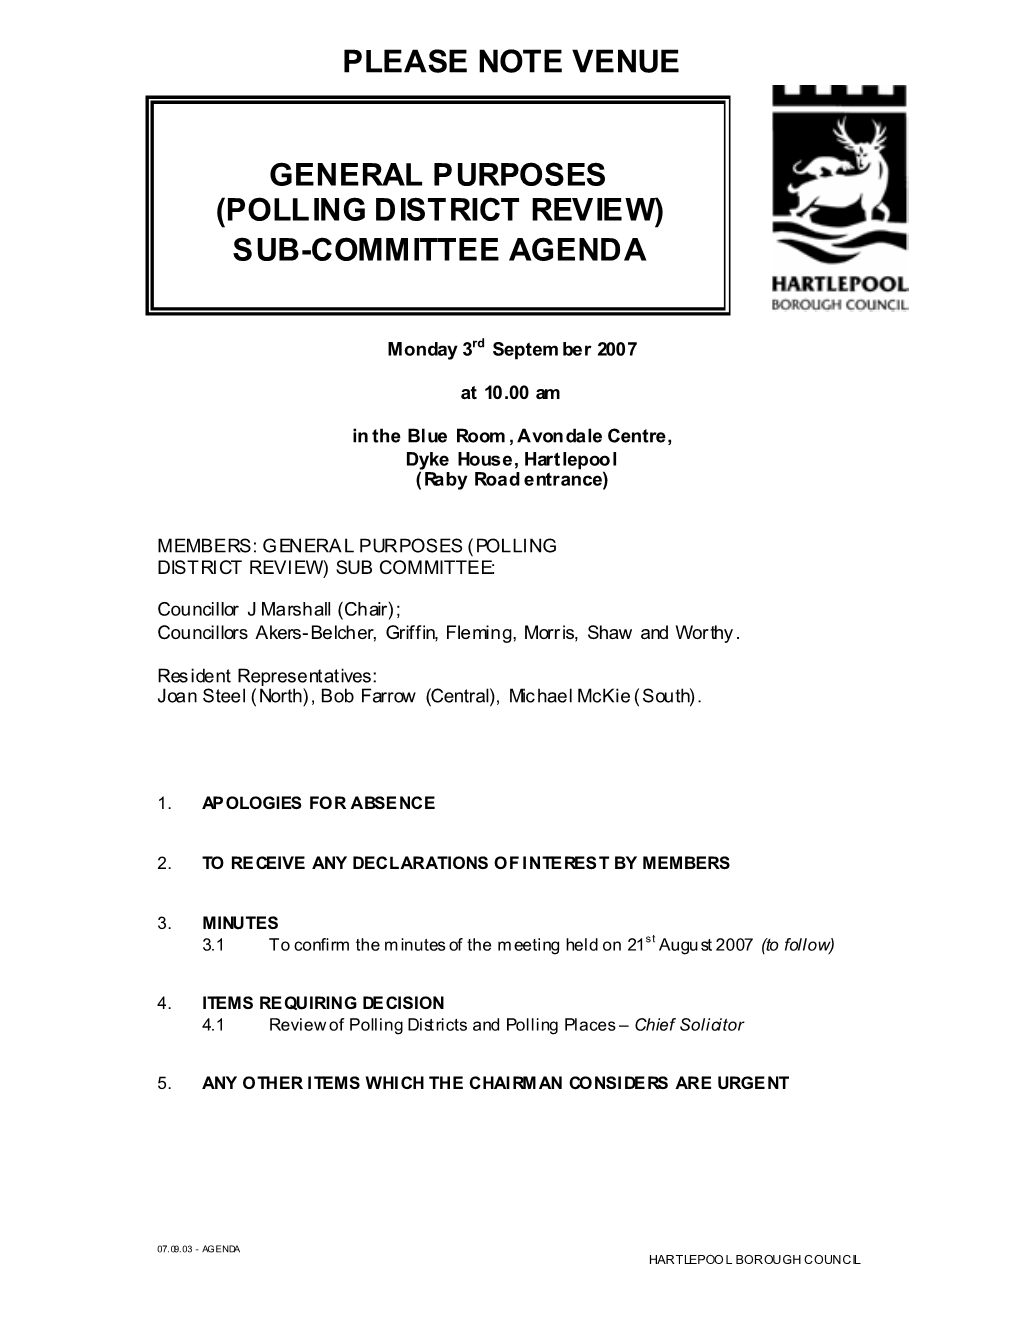 General Purposes (Polling District Review) Sub-Committee Agenda